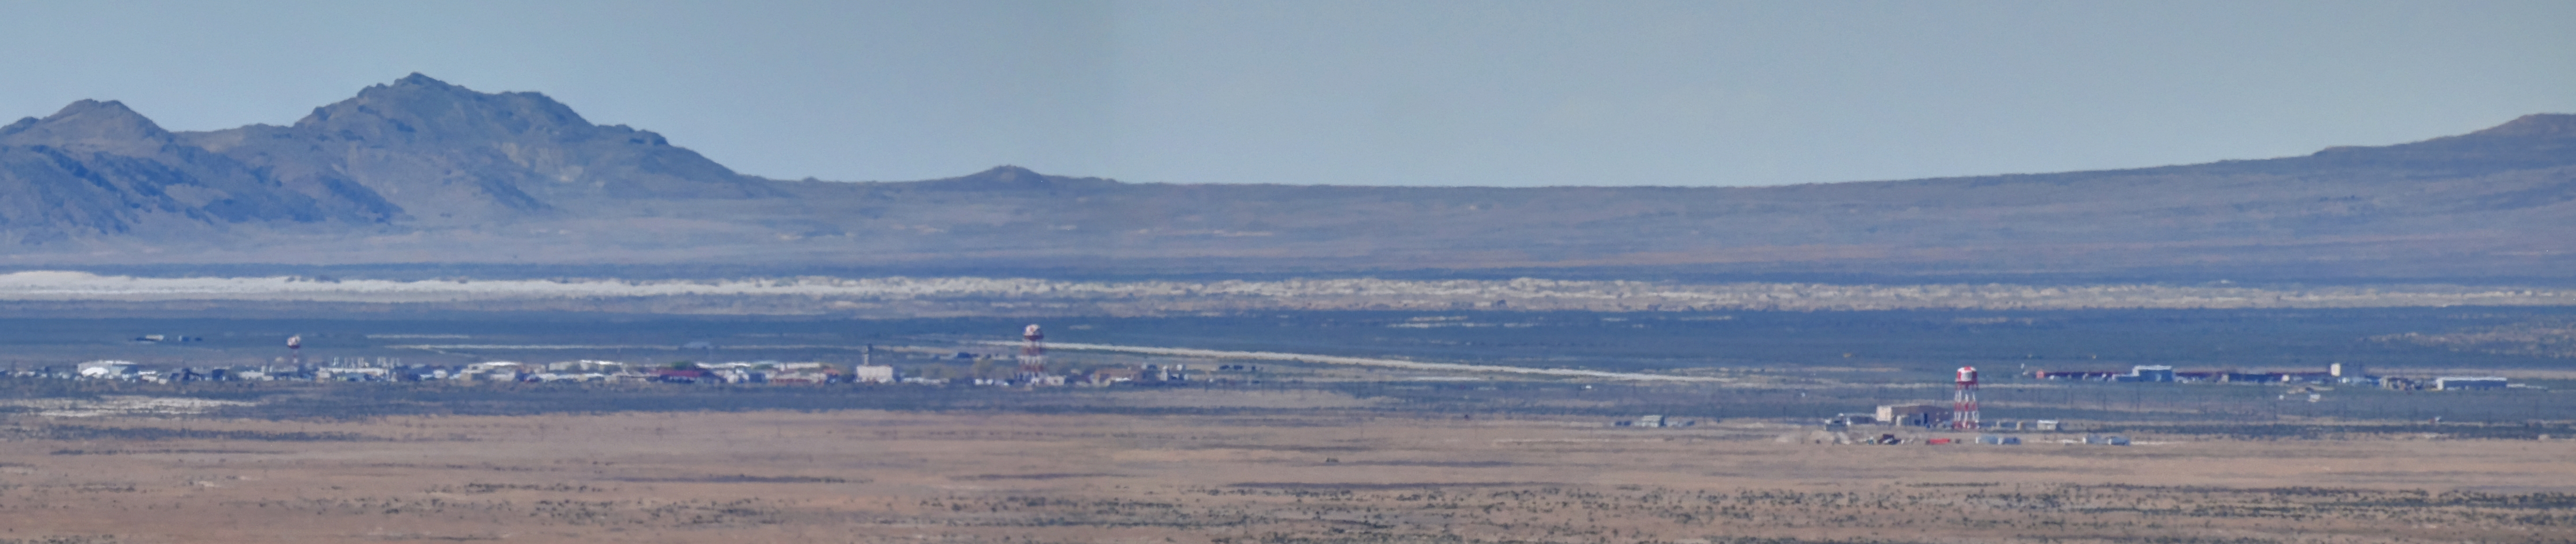 Dugway Proving Grounds Zoom 2